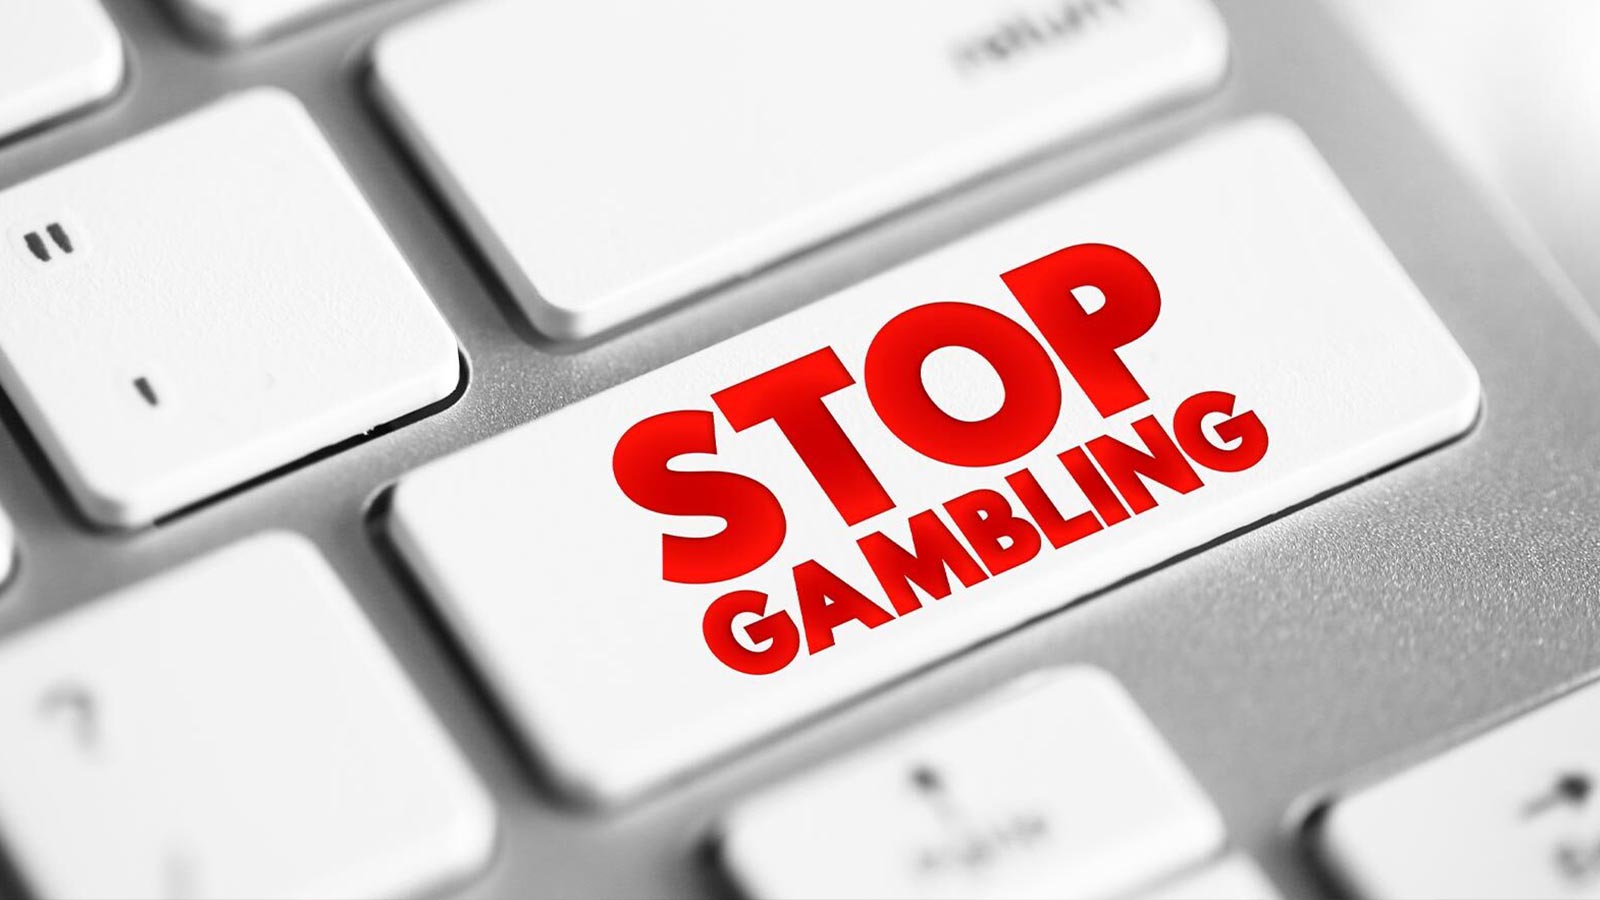 How to stop gambling addiction